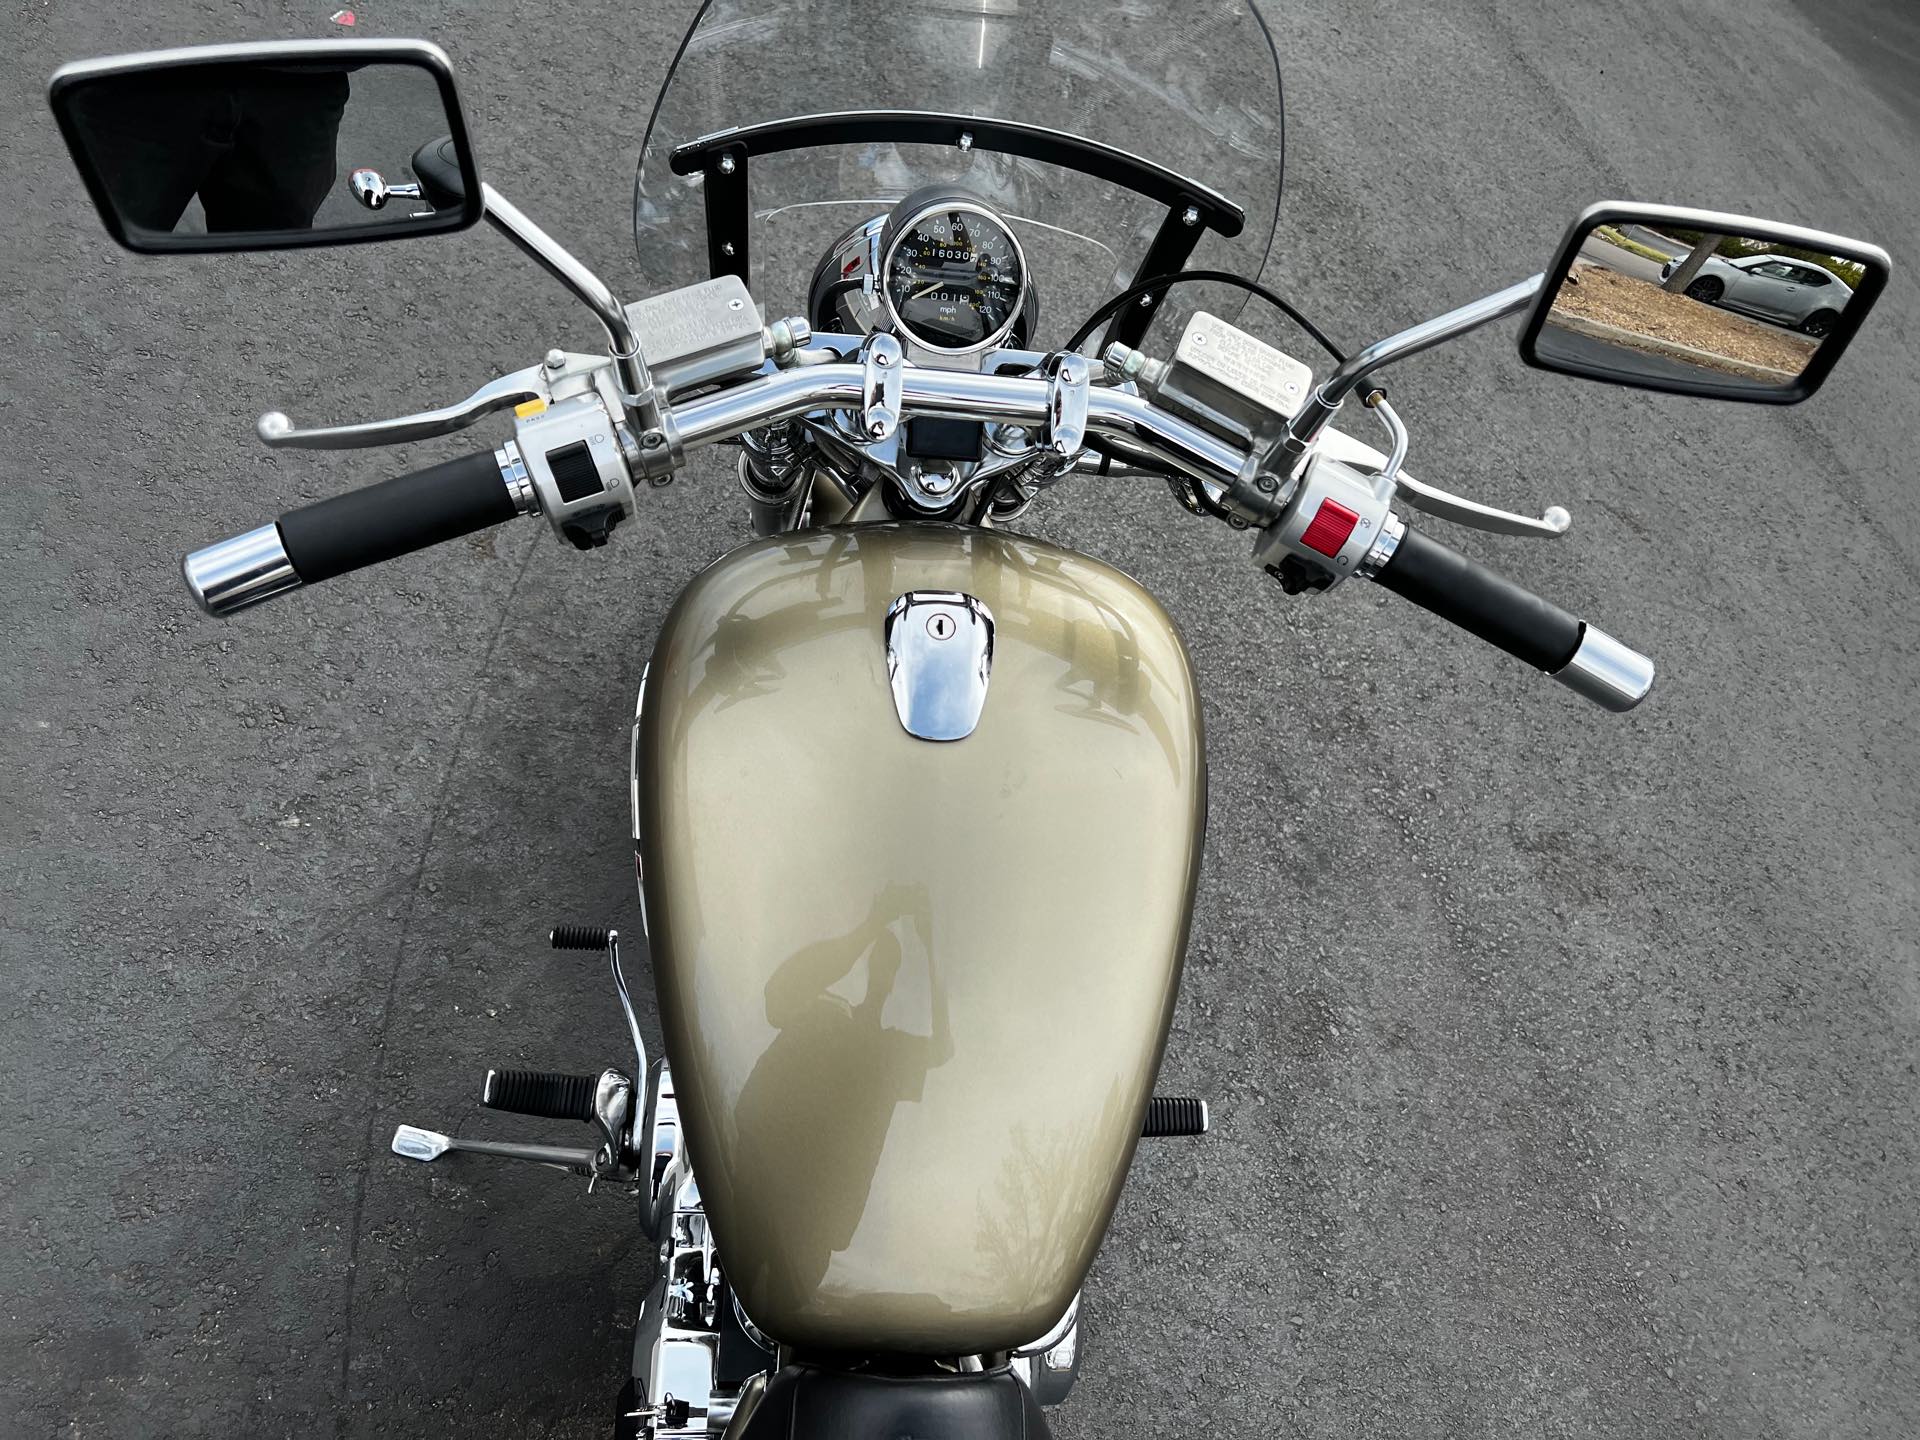 2008 Suzuki Boulevard S83 at Aces Motorcycles - Fort Collins